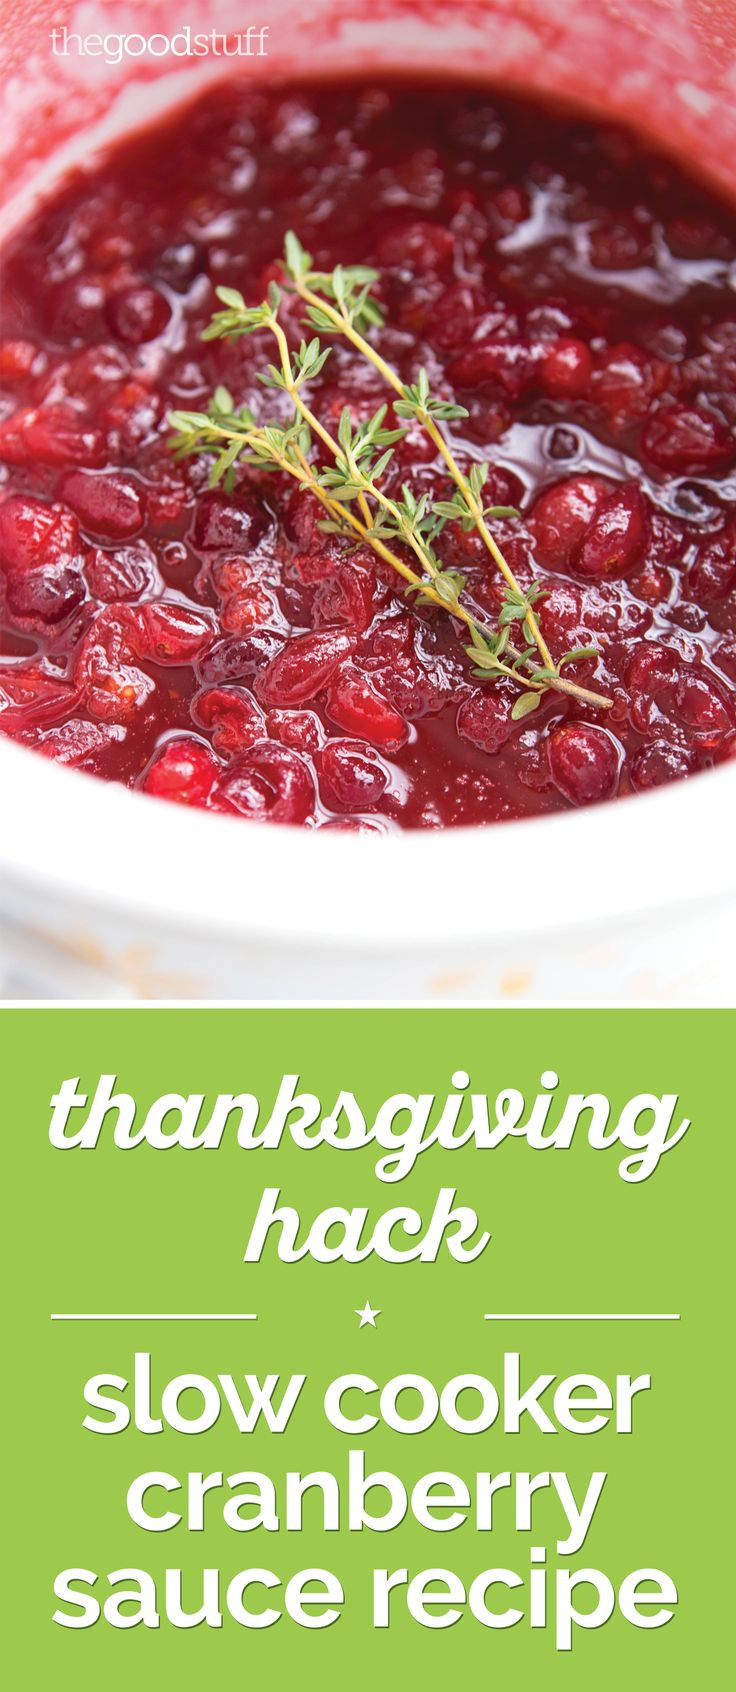 Cranberry Recipes For Thanksgiving
 Thanksgiving Hack Slow Cooker Cranberry Sauce Recipe